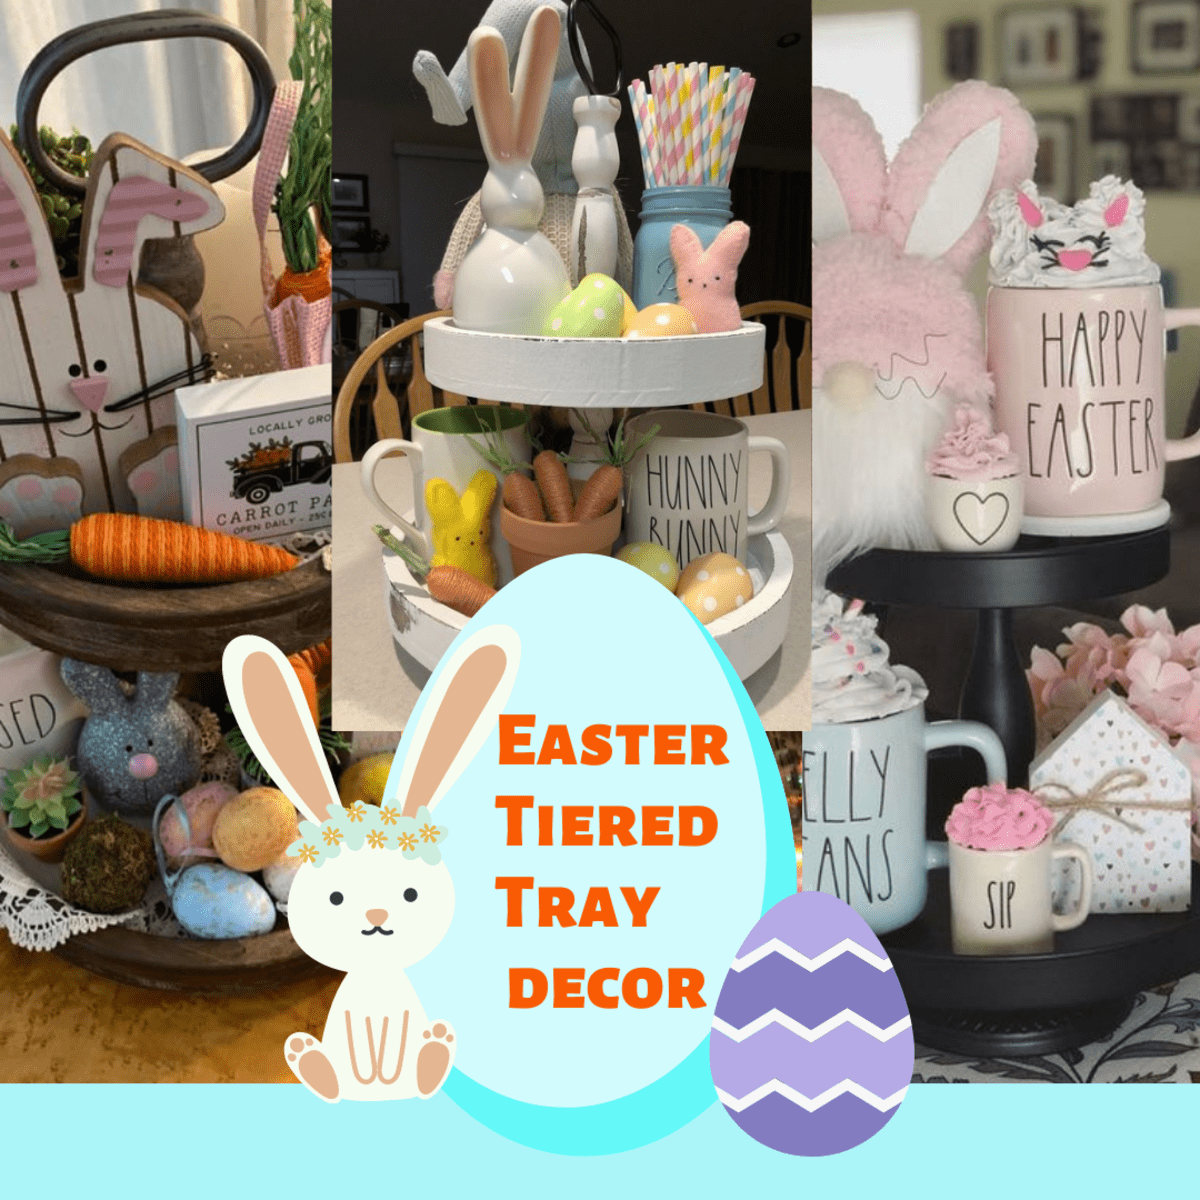 45+ Super Adorable Easter Tiered Tray Ideas that will have you